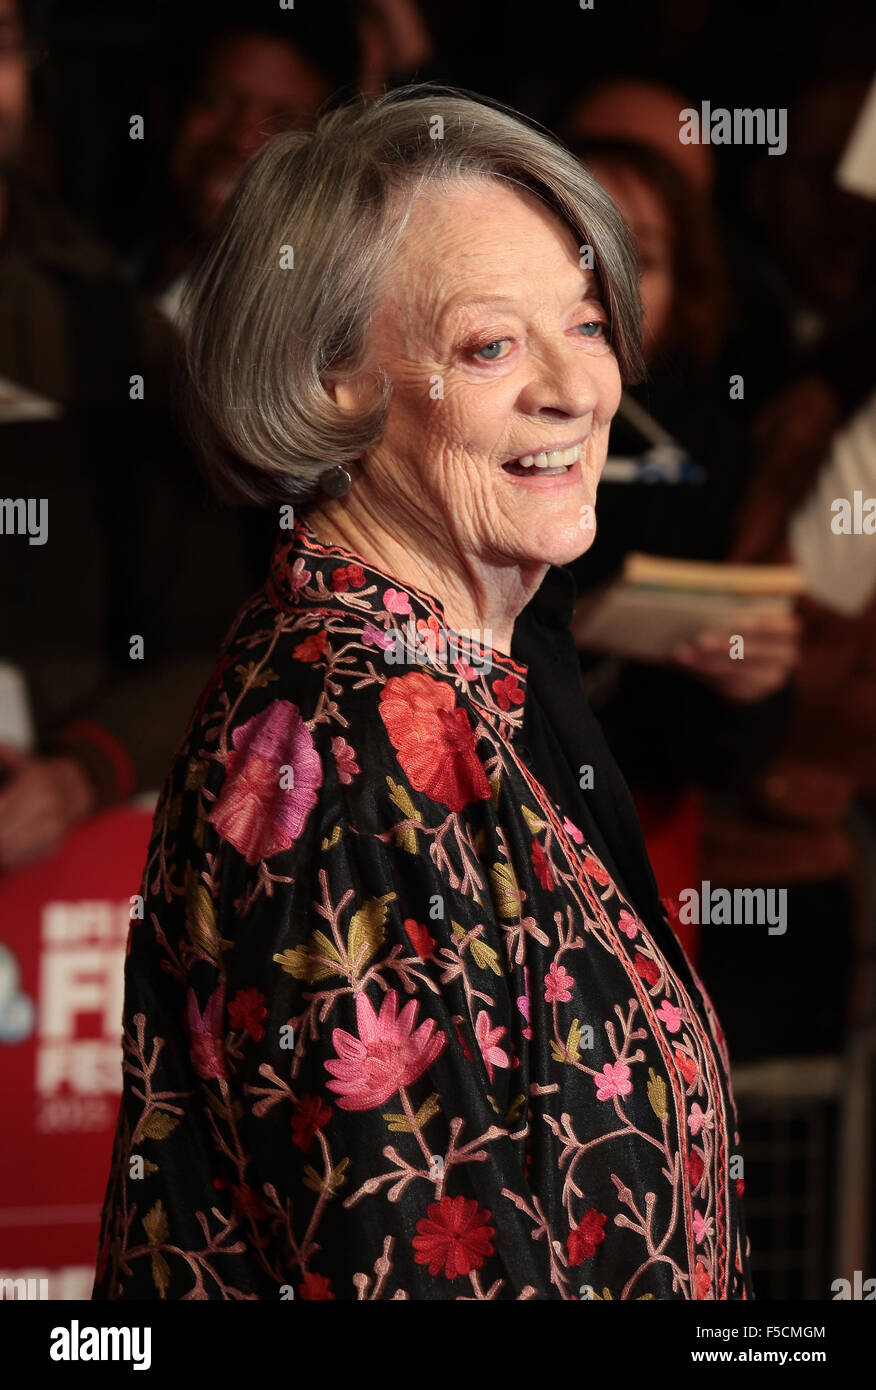 London, UK, 13th Oct 2015: Dame Maggie Smith attends The Lady In The Van premiere, 59th BFI London Film Festival in London Stock Photo